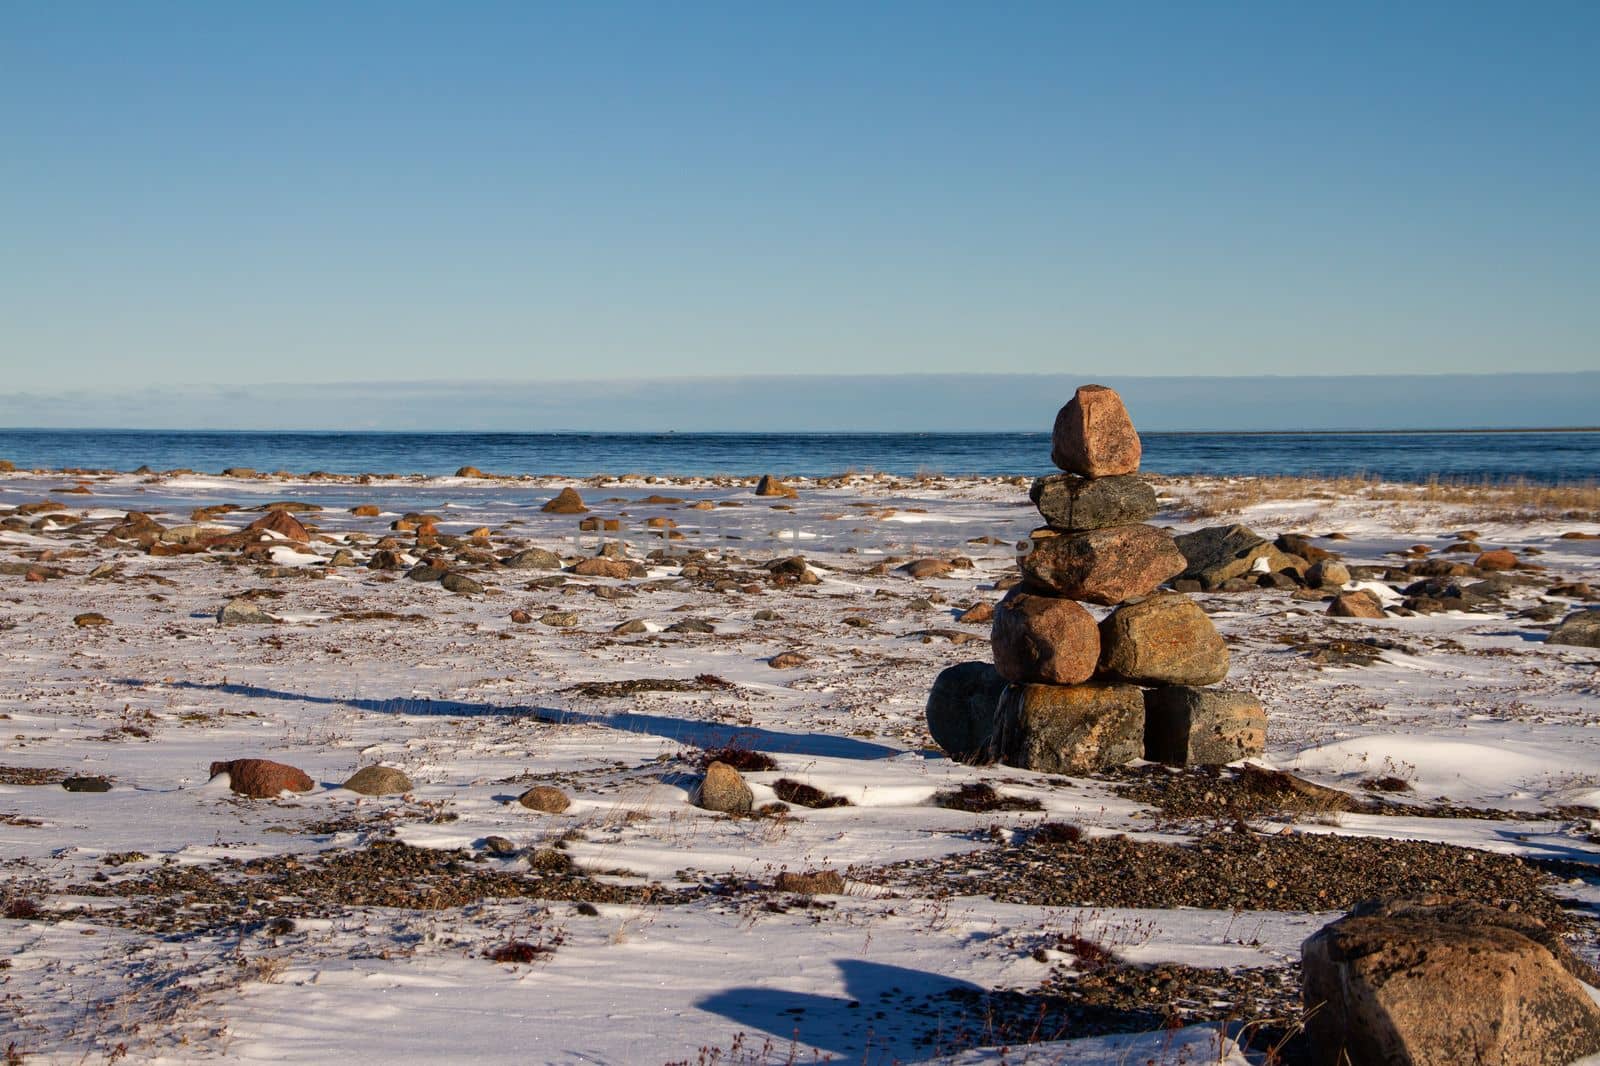 Arctic landscape - an Inuksuk or Inukshuk landmark on a snow covered arctic tundra in Nunavut on a clear sunny day by Granchinho